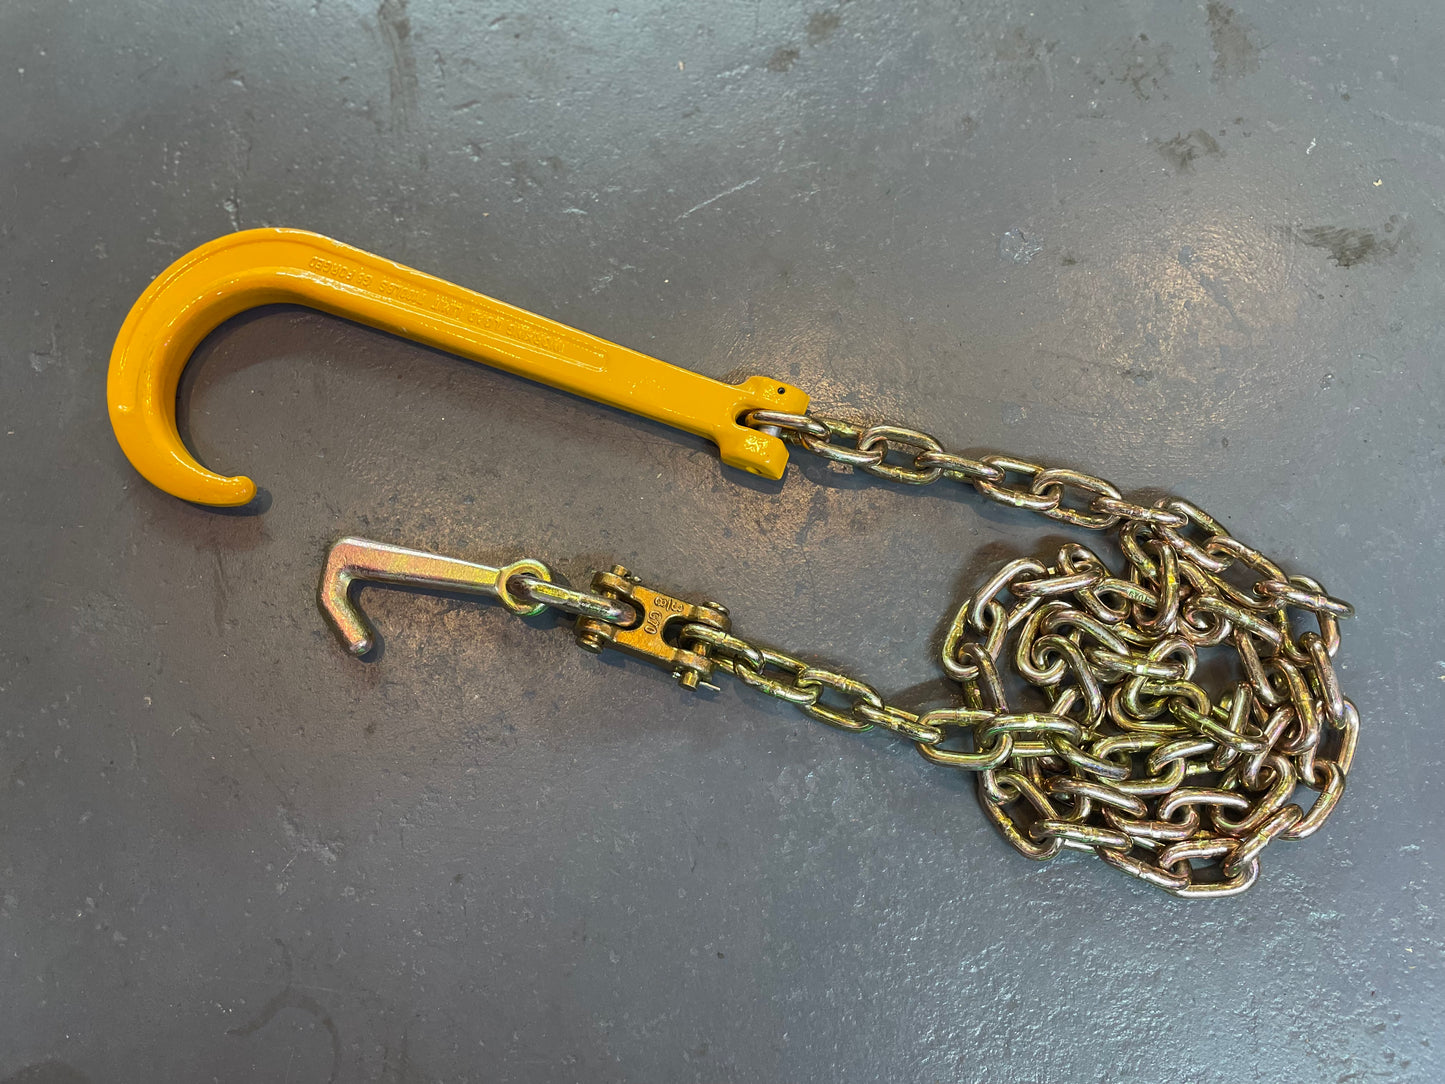 5/16 X 10' Safety Chain w/ G80 15" J hook and Mini J hook on other end for Rollback Tow Trucks